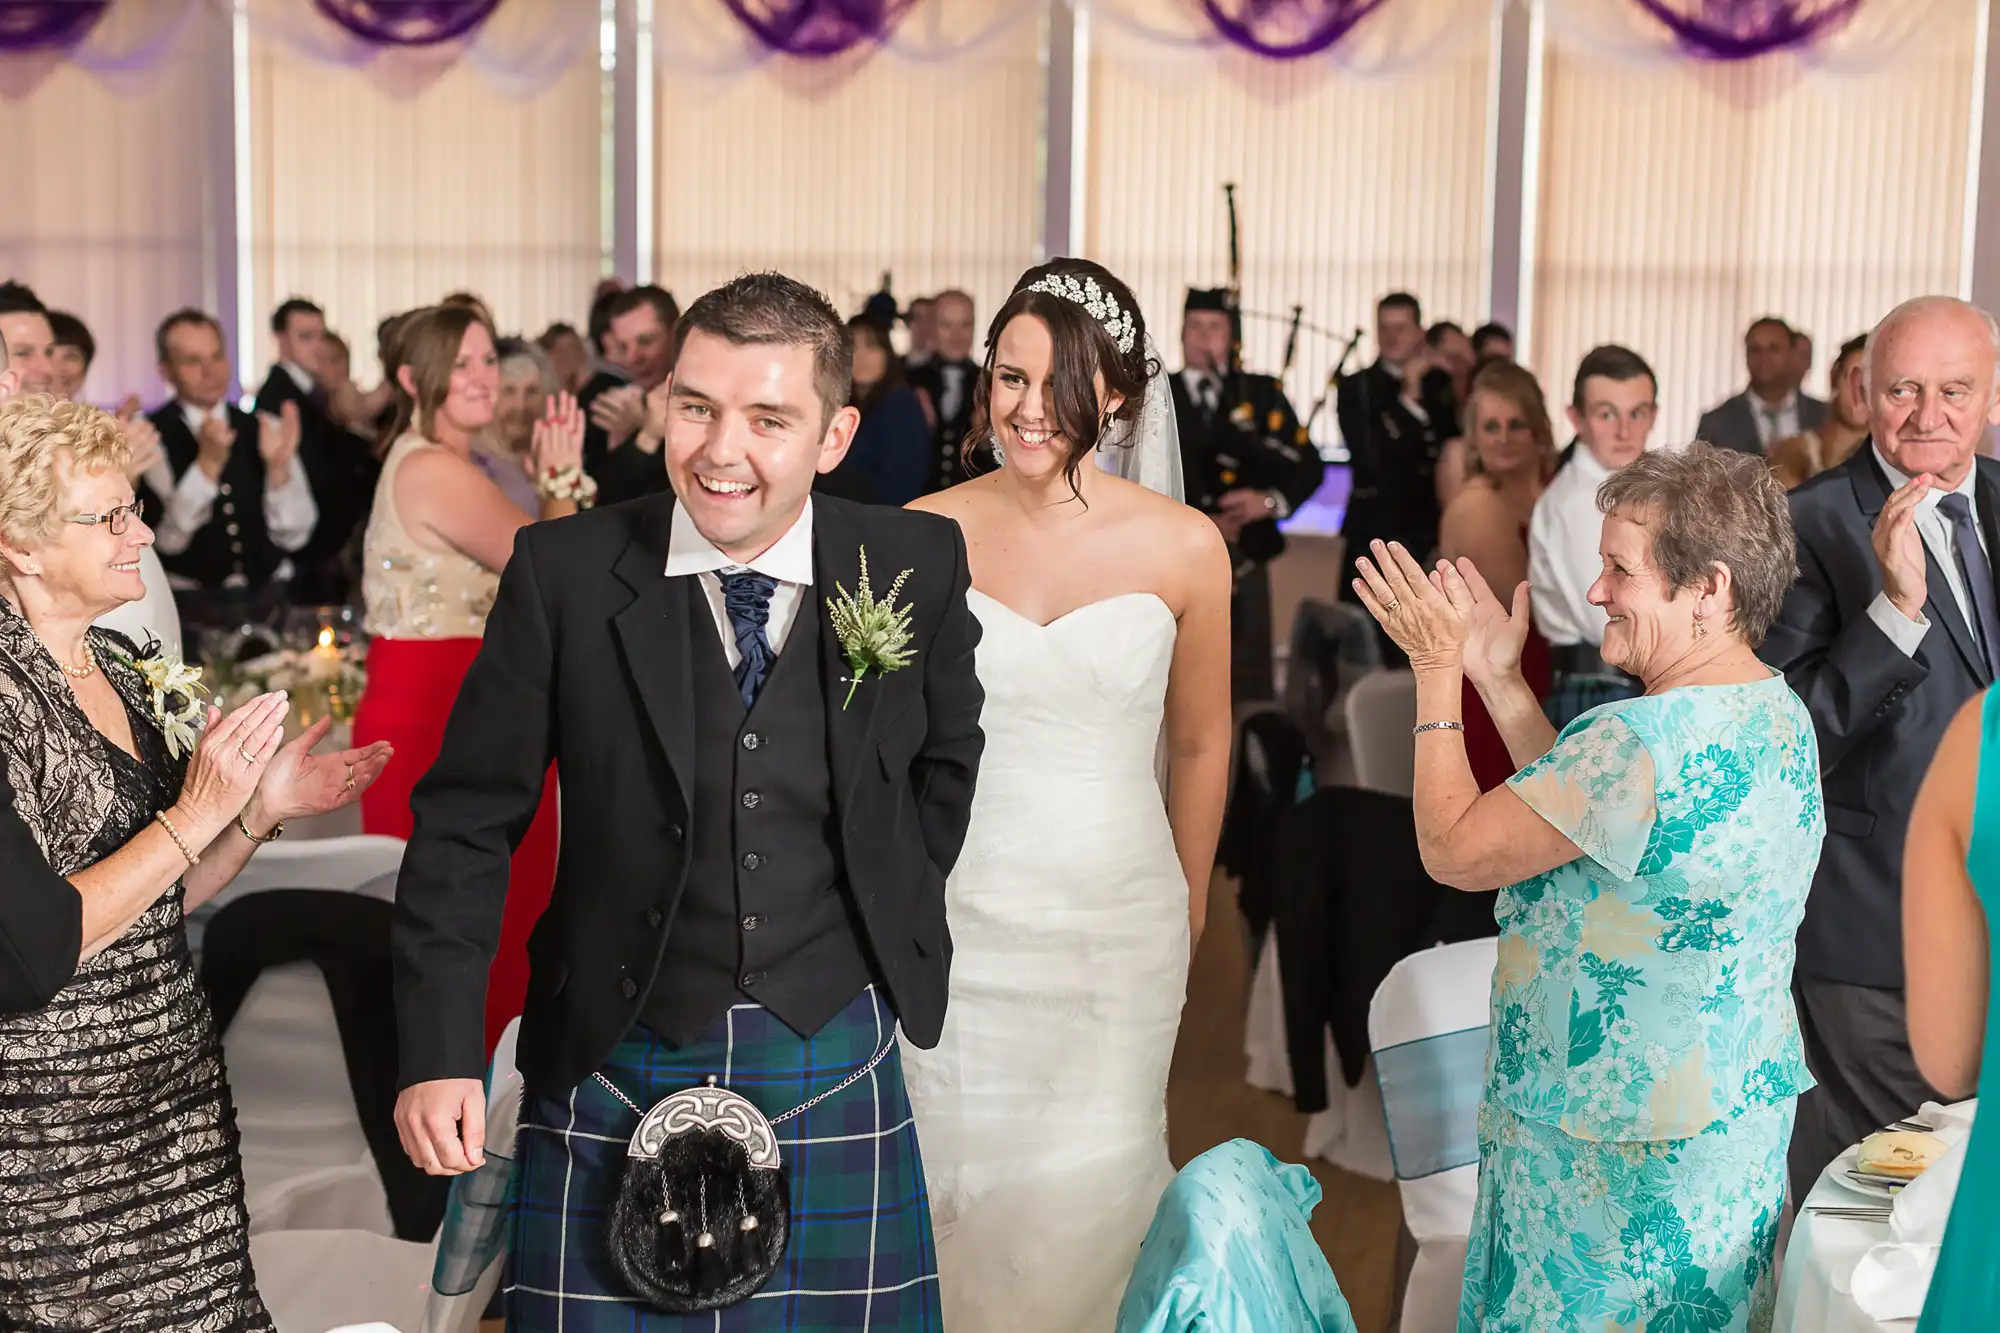 A bride and groom walk through a clapping crowd in a decorated hall, the groom wearing a kilt and the bride in a white dress.